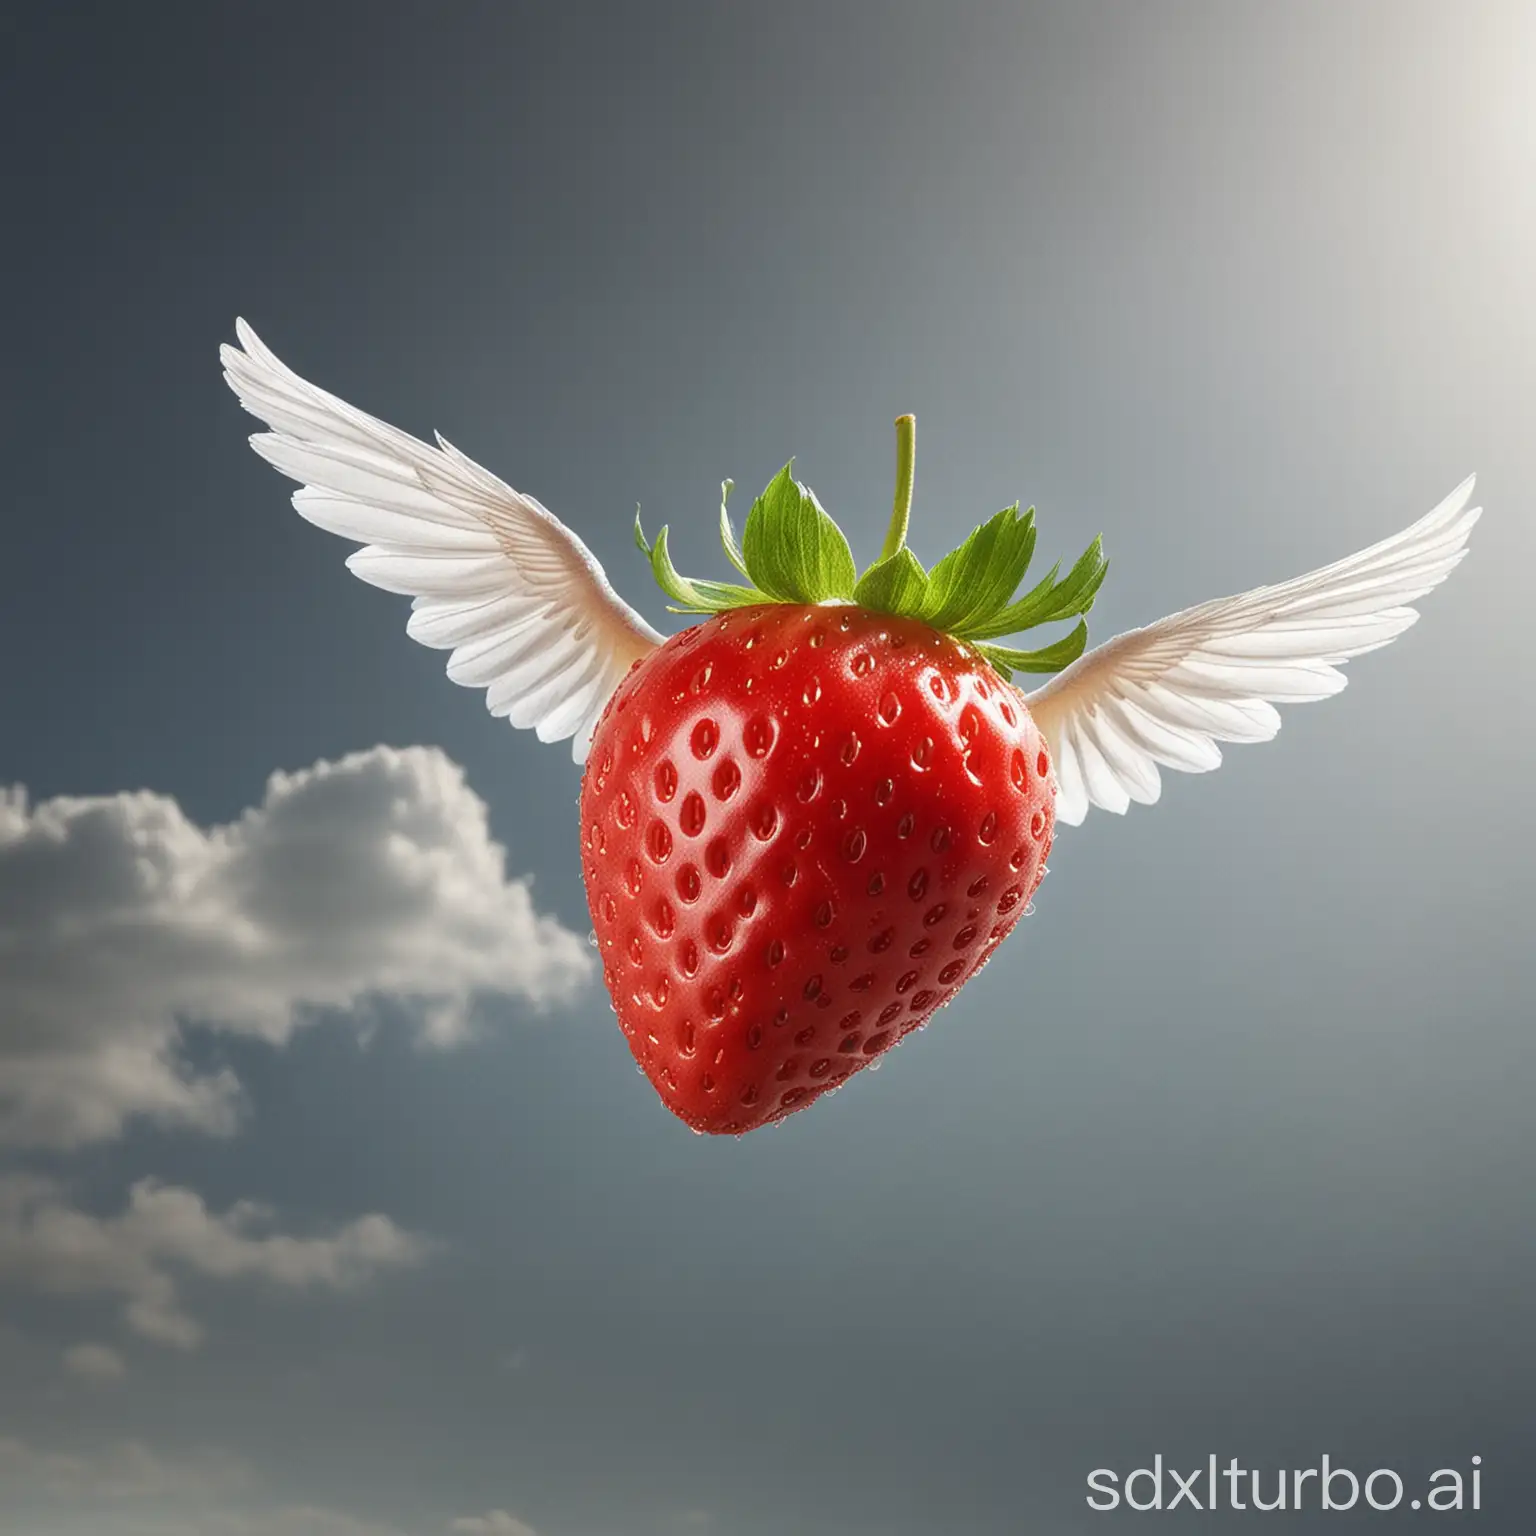 Flying strawberry is about to land